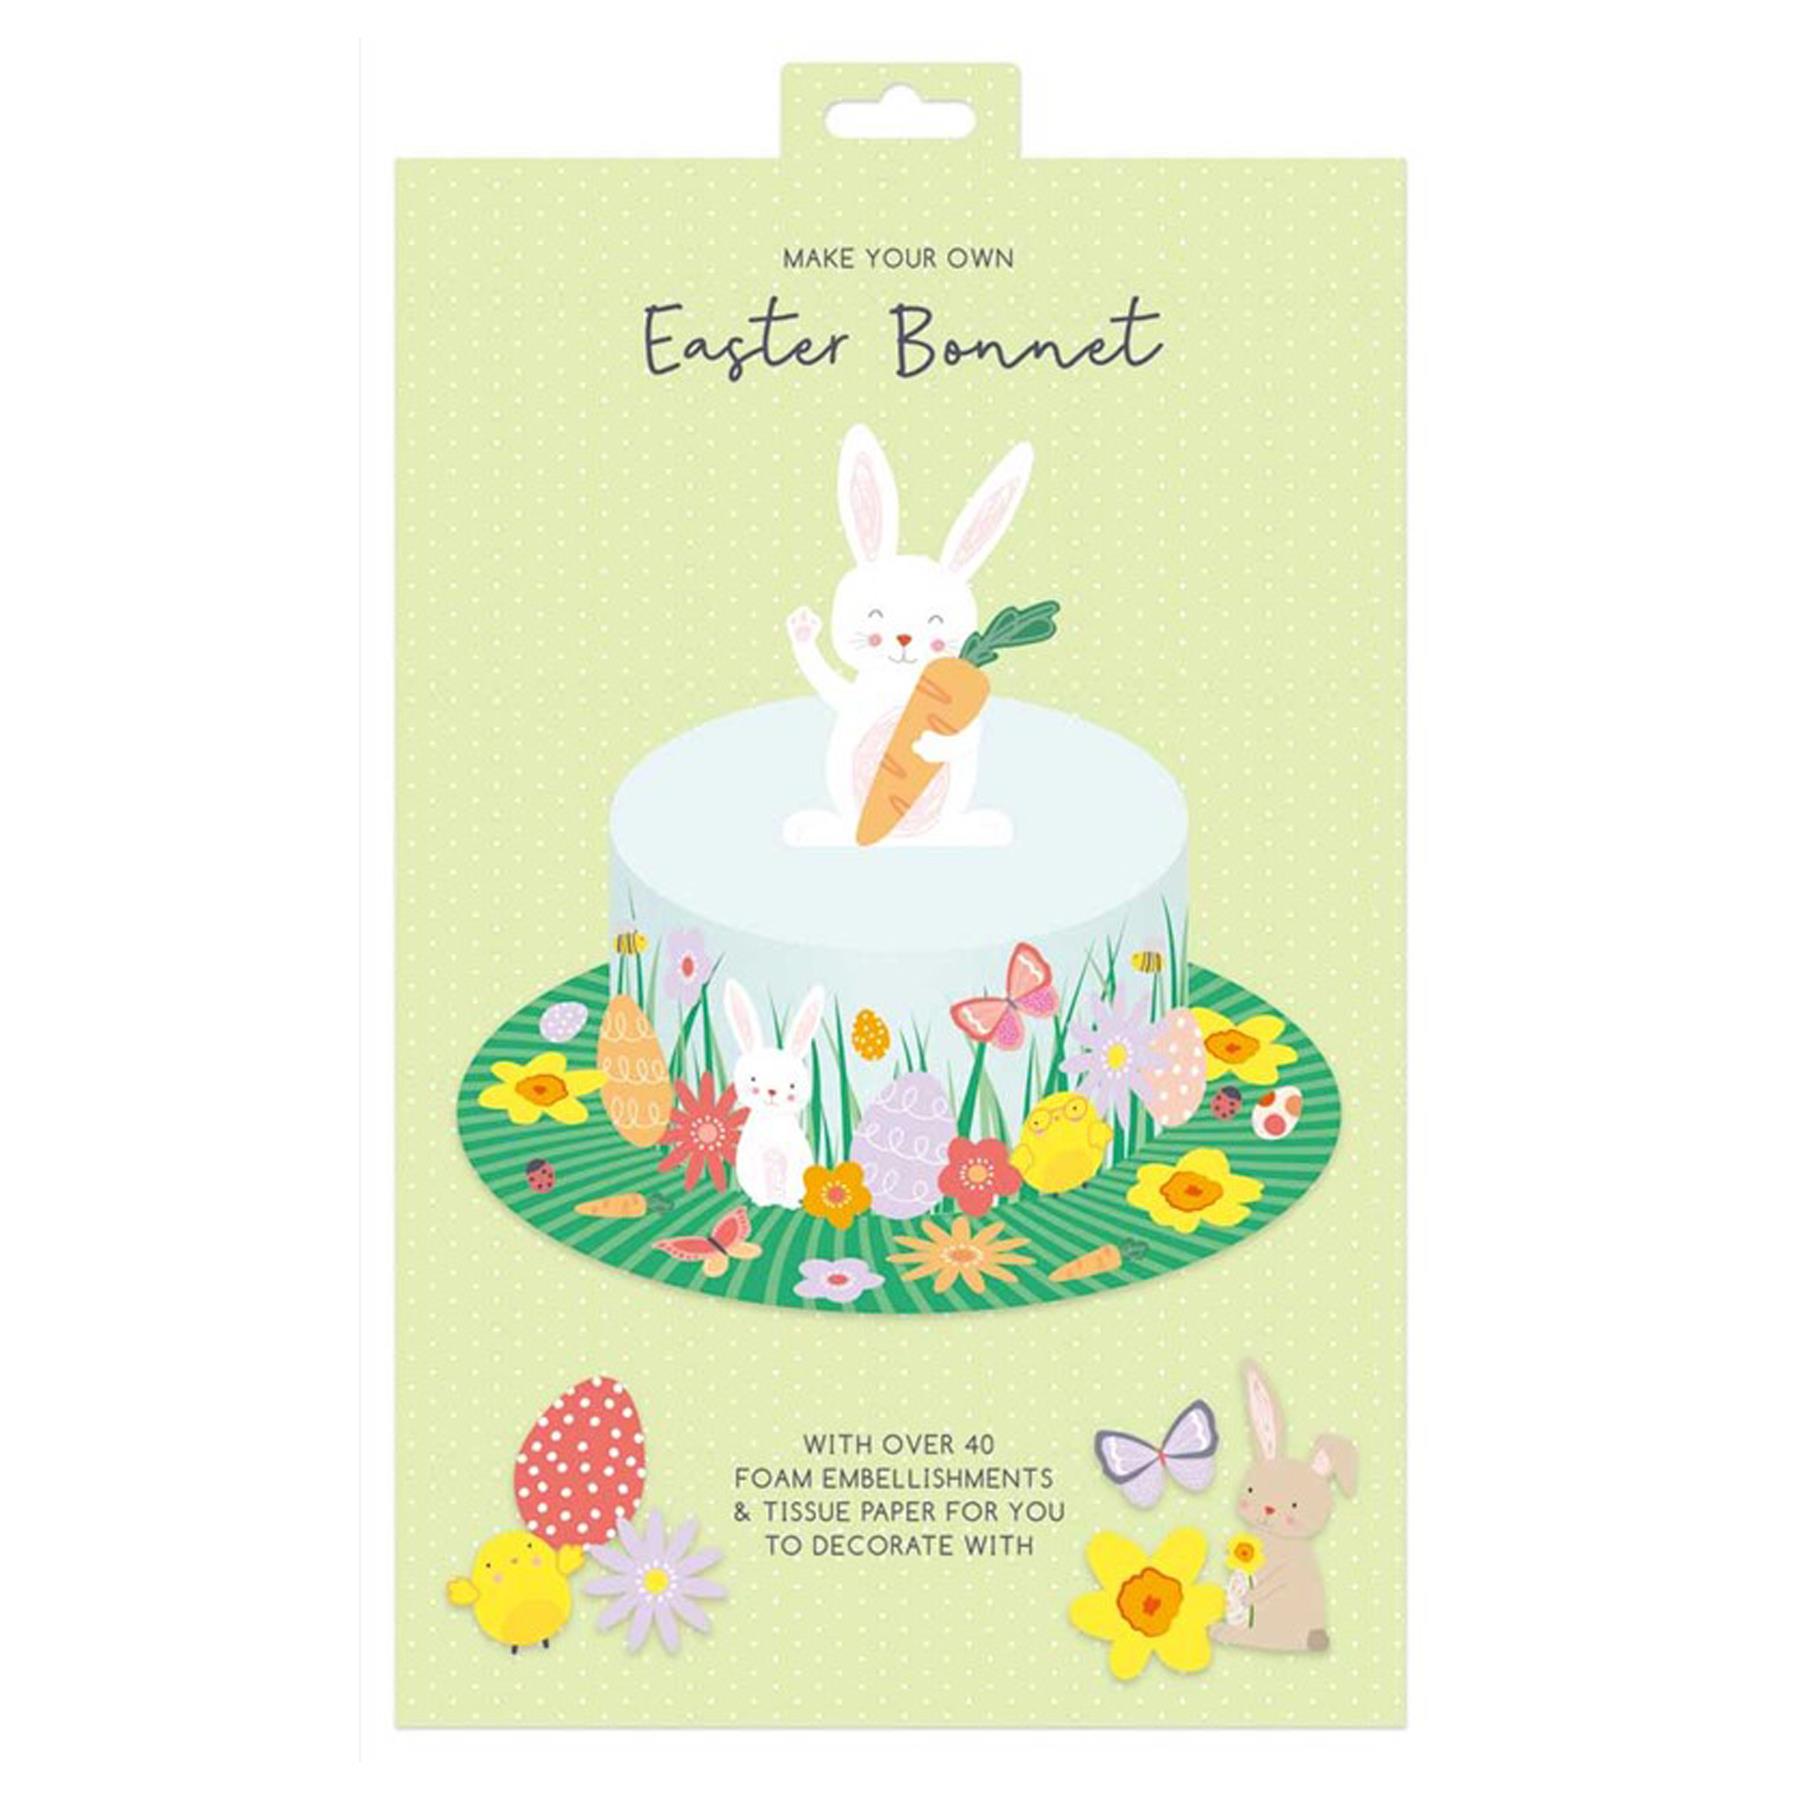 Easter Arts and Crafts Children Activities - Make Your Own Easter Bonnet Kit